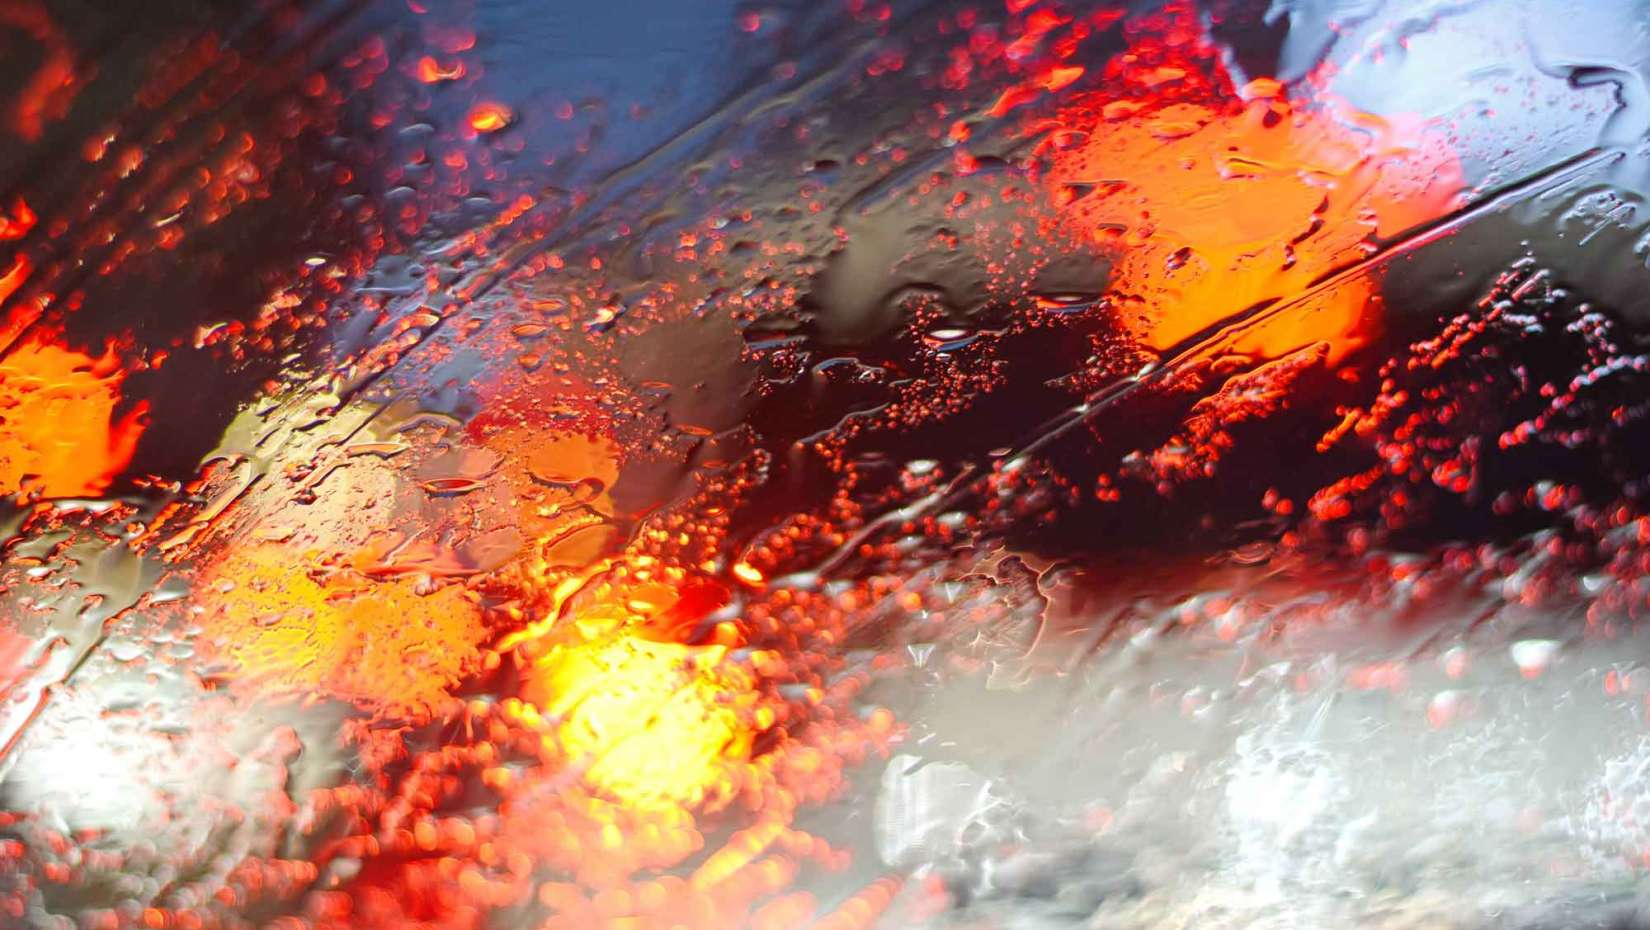 Abstract Photography for Beginners: 9 Tips for Capturing Stunning